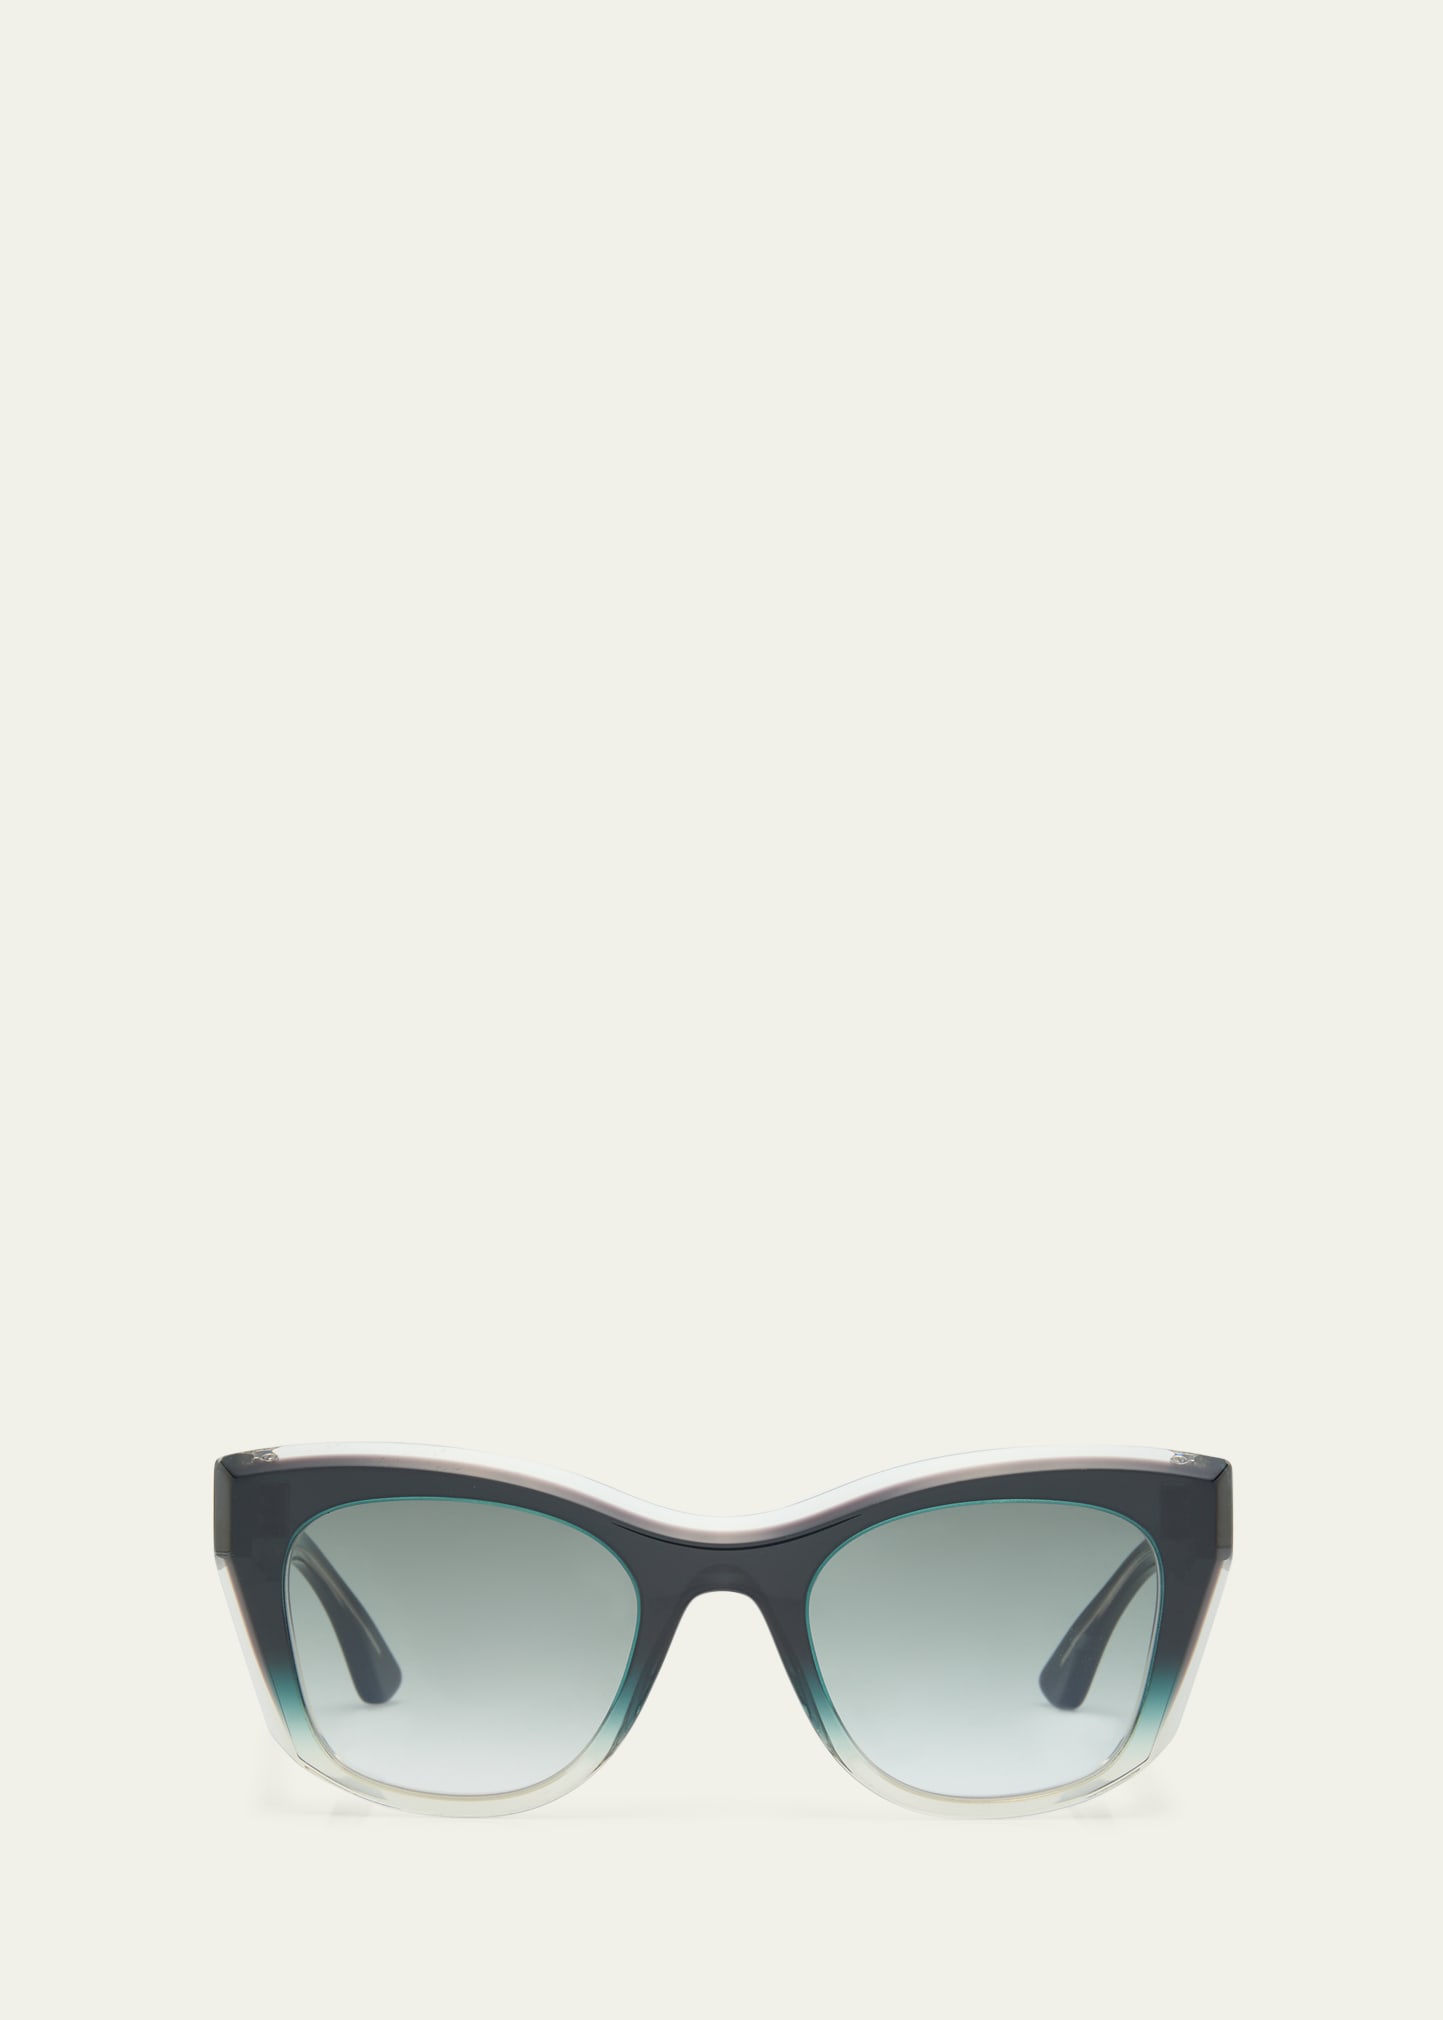 Thierry Lasry Prodigy 3027 Acetate Cat-eye Sunglasses In Green